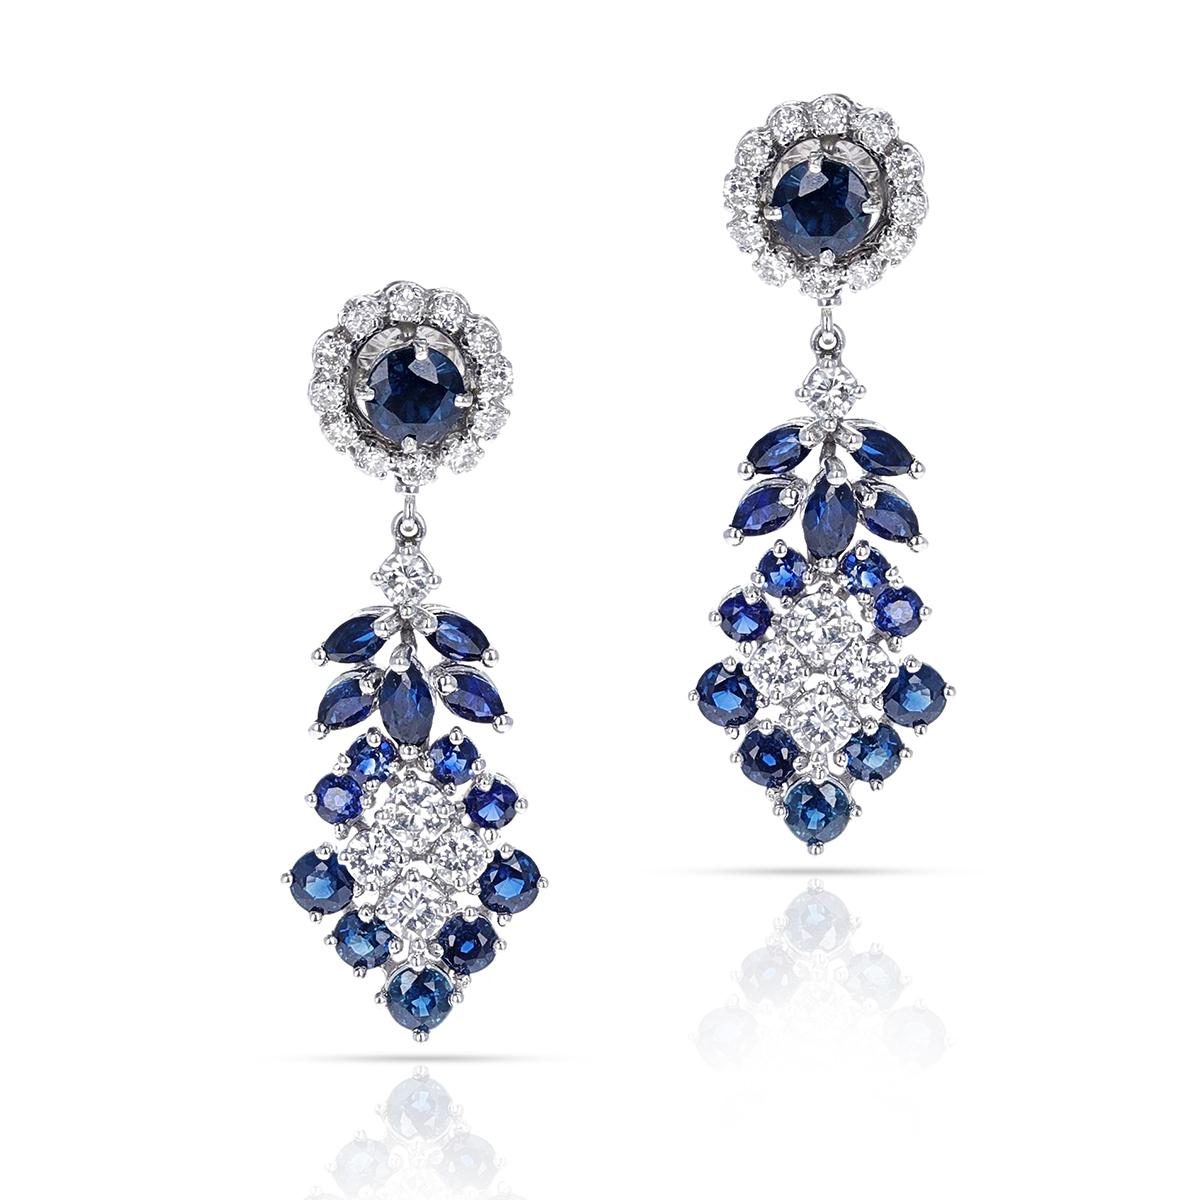 A 2 ct. Round Diamond and 3.50 ct. Round Sapphire Dangling Cocktail Earrings made in 14K White Gold. The total weight is 10.90 grams. The length is 1.60 inches. 